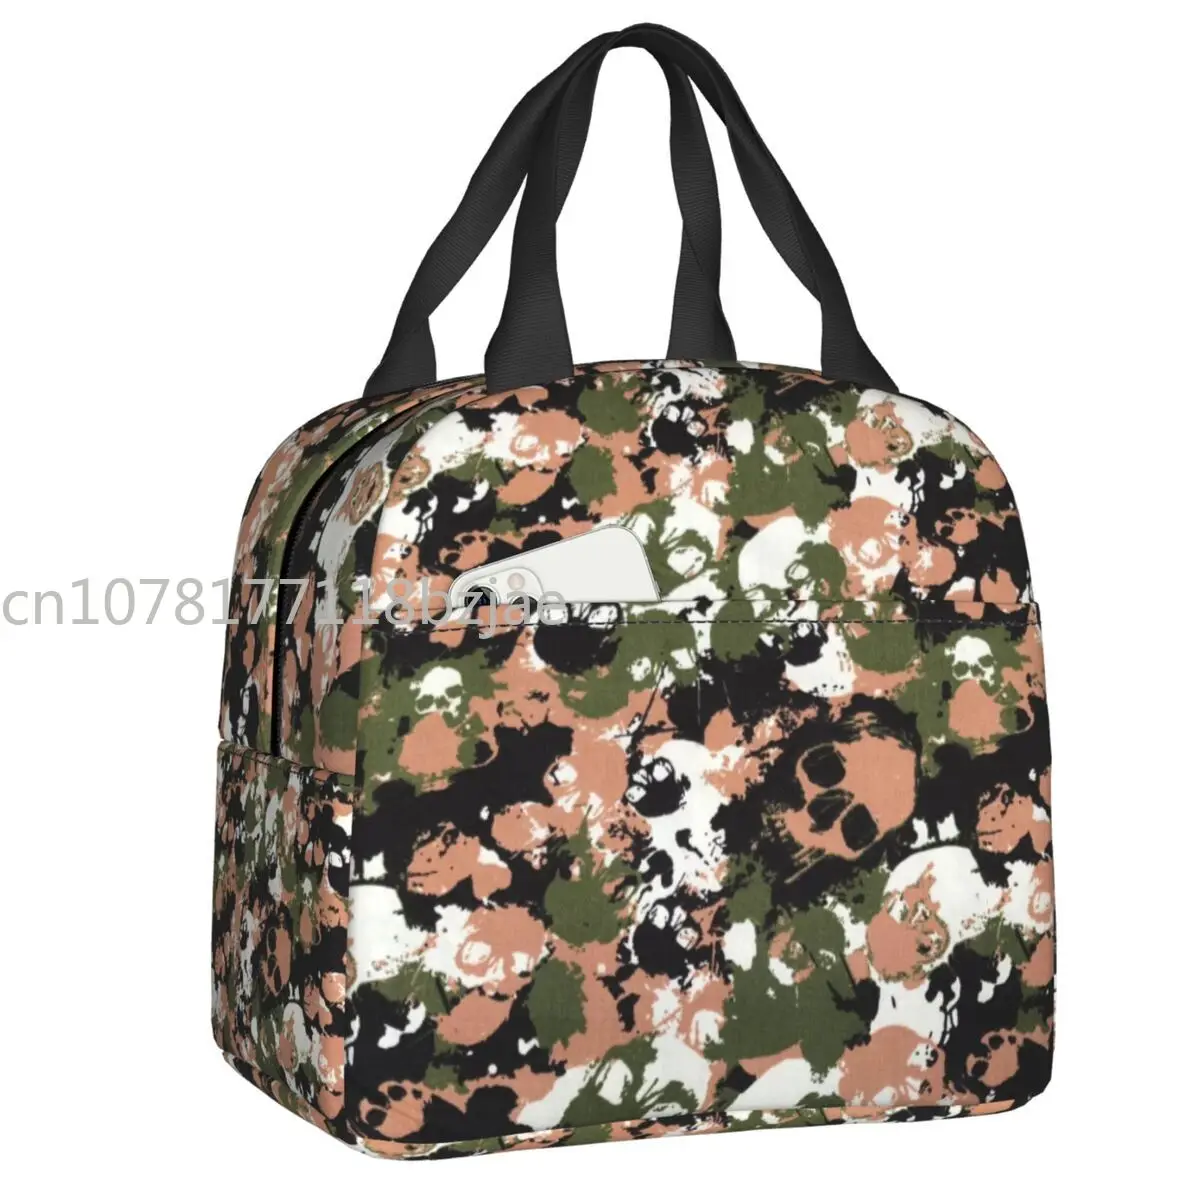 

Great Camouflage Skull Design Insulated Lunch Tote Bag for Women Camo Resuable Thermal Cooler Food Lunch Box School